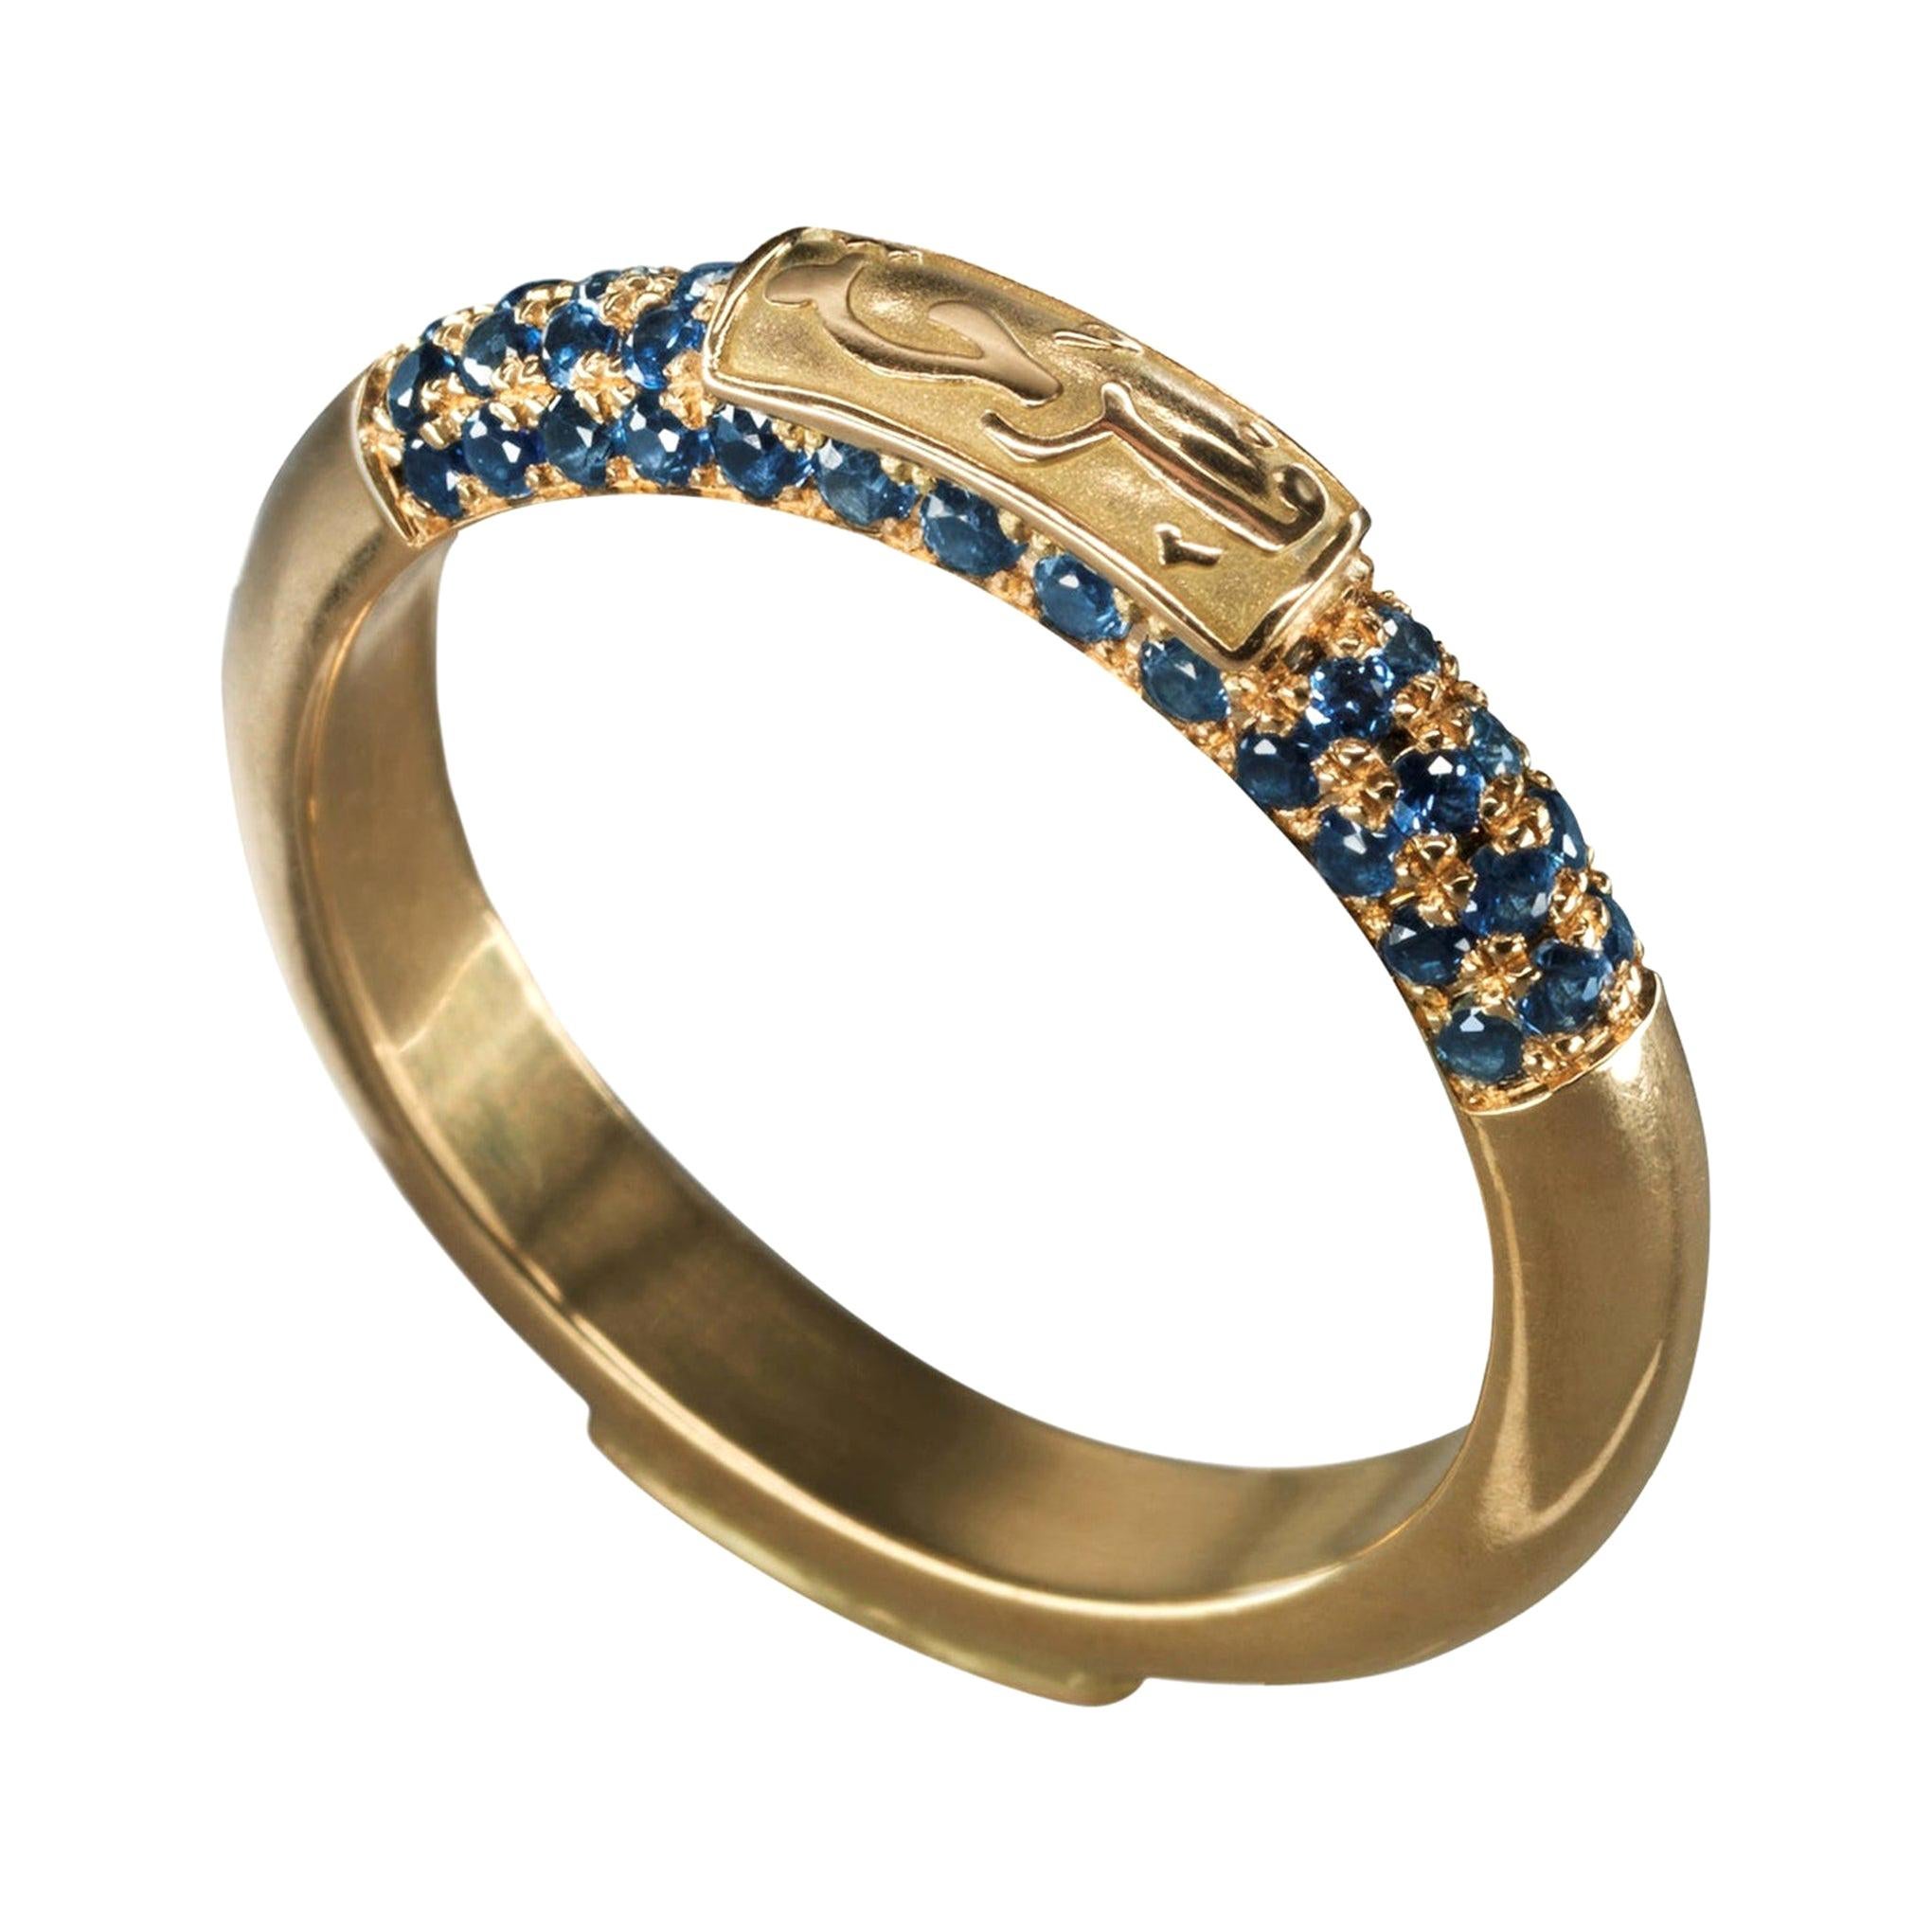 For Sale:  18 Karat Gold and 0.90 Carat Sapphire Limited "Happiness" Band Ring